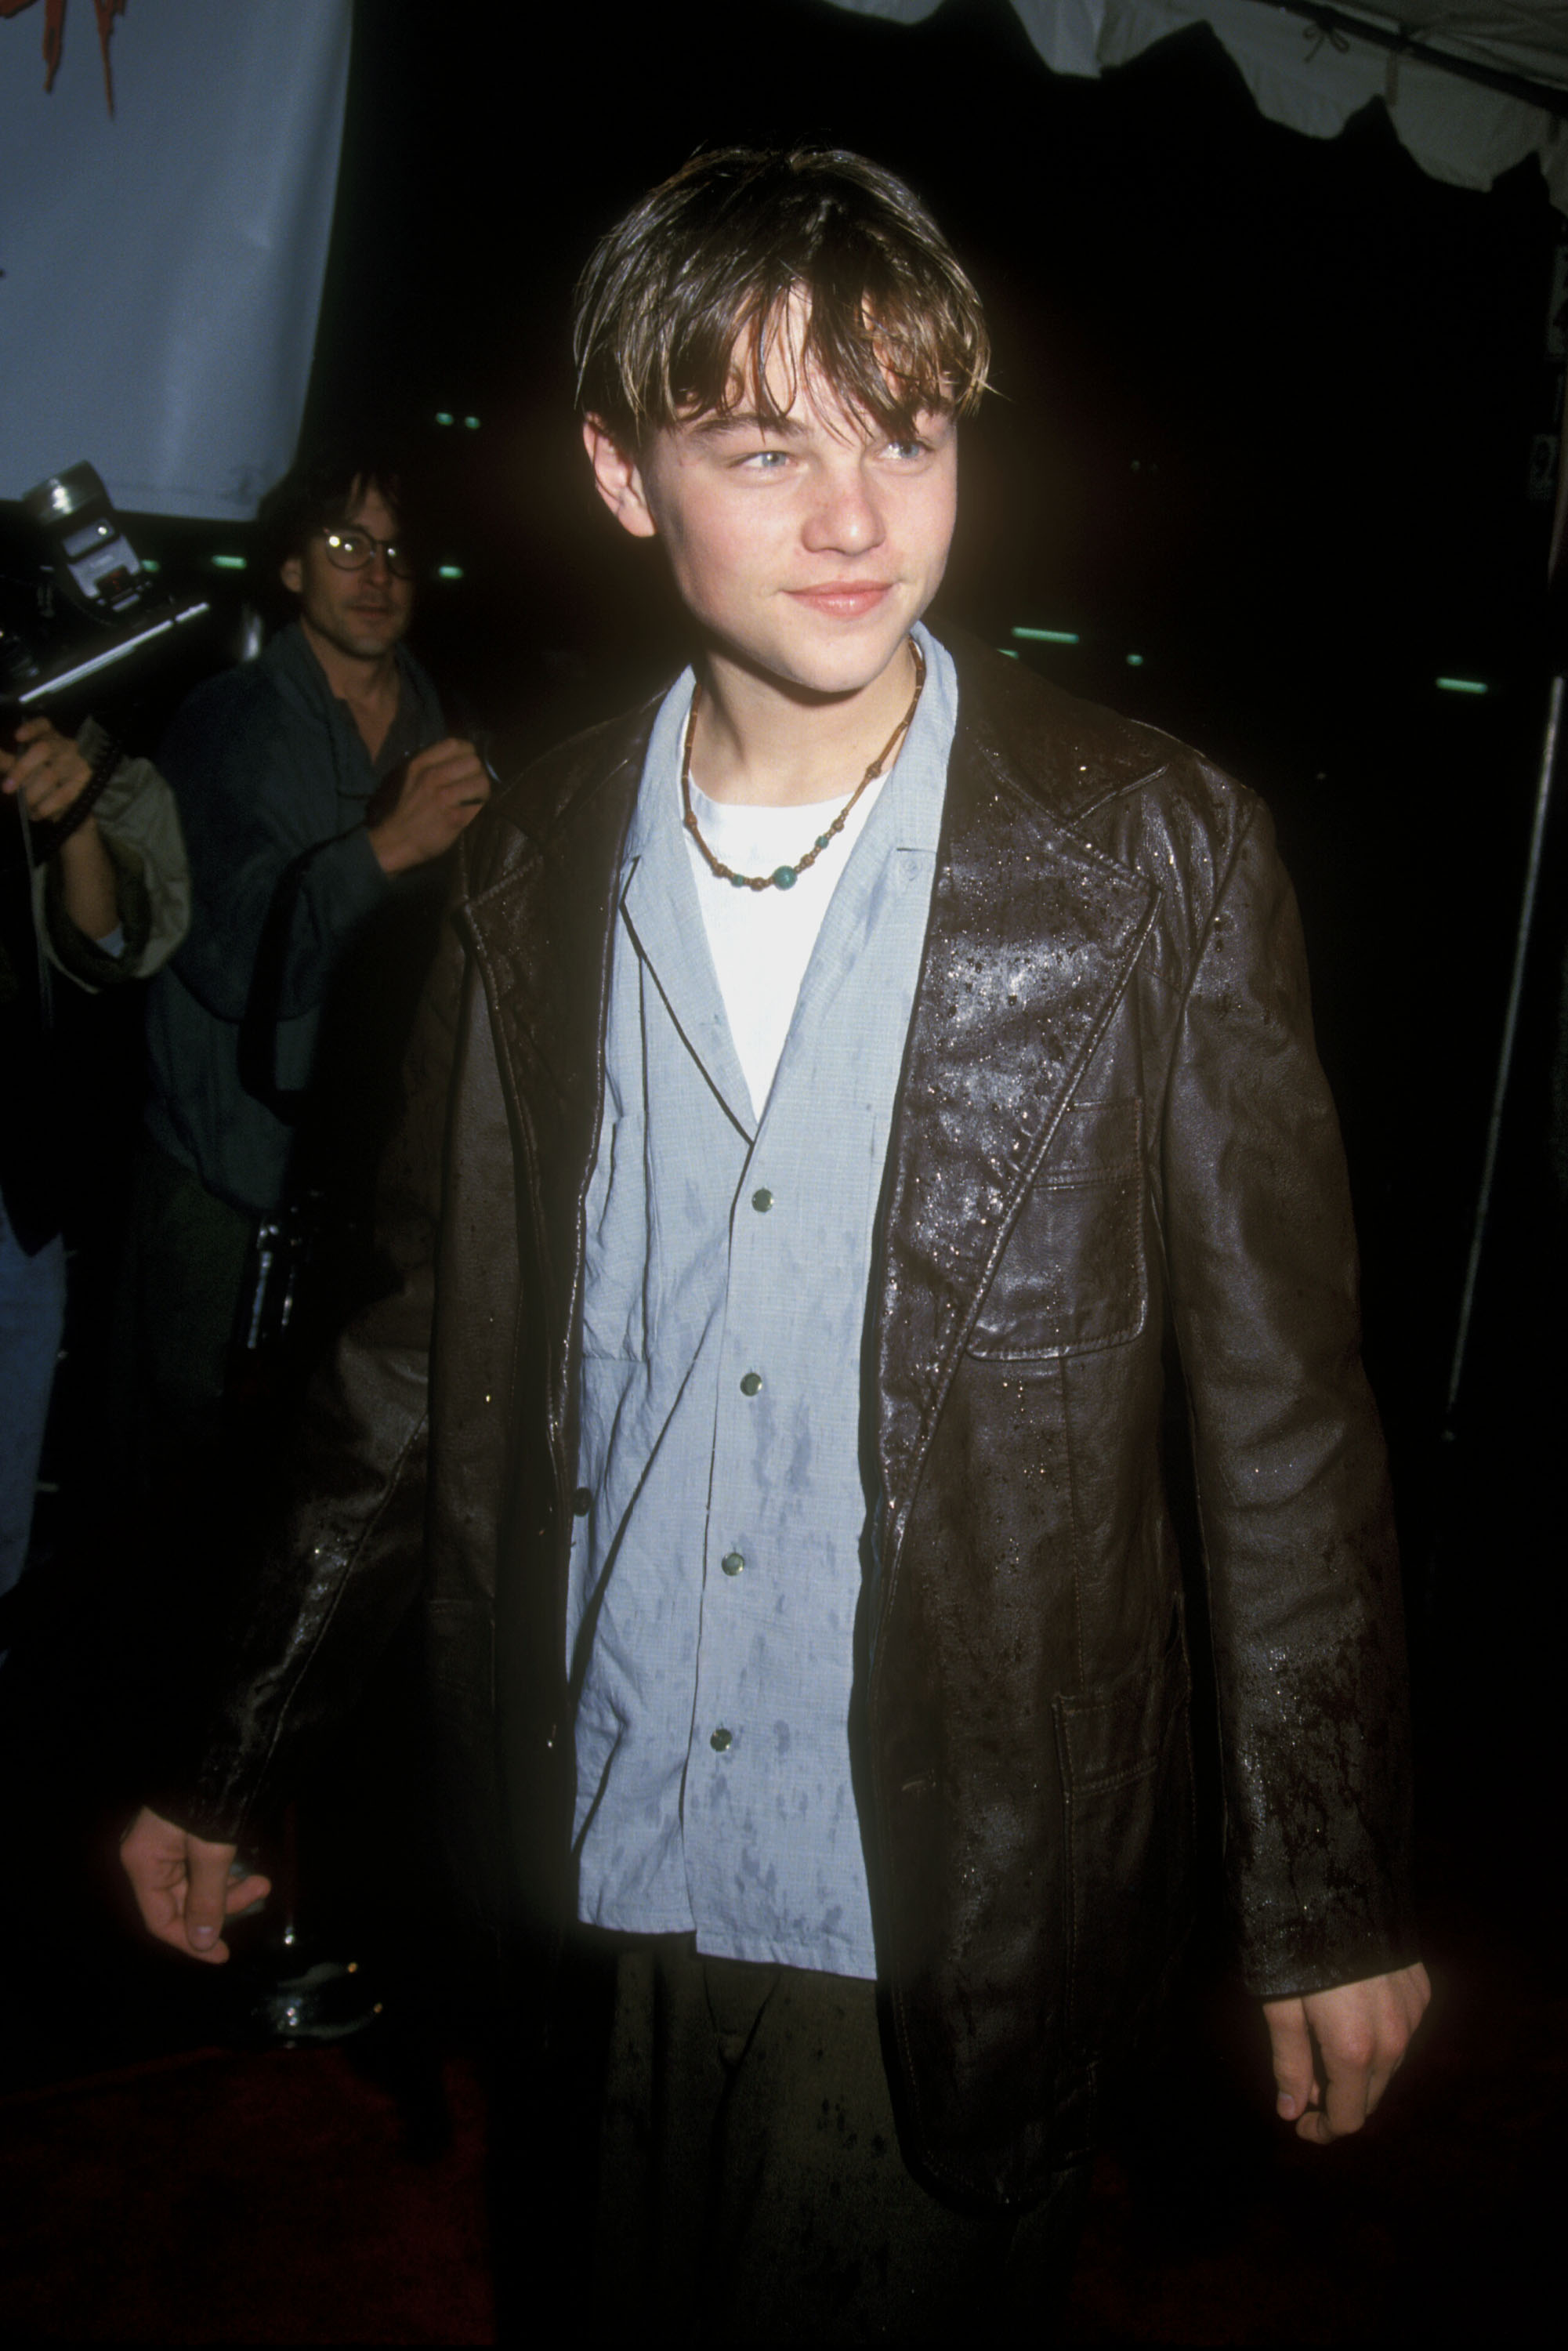 Leonardo DiCaprio at the premiere of Benny &amp; Joon in Los Angeles on March 25, 1993.